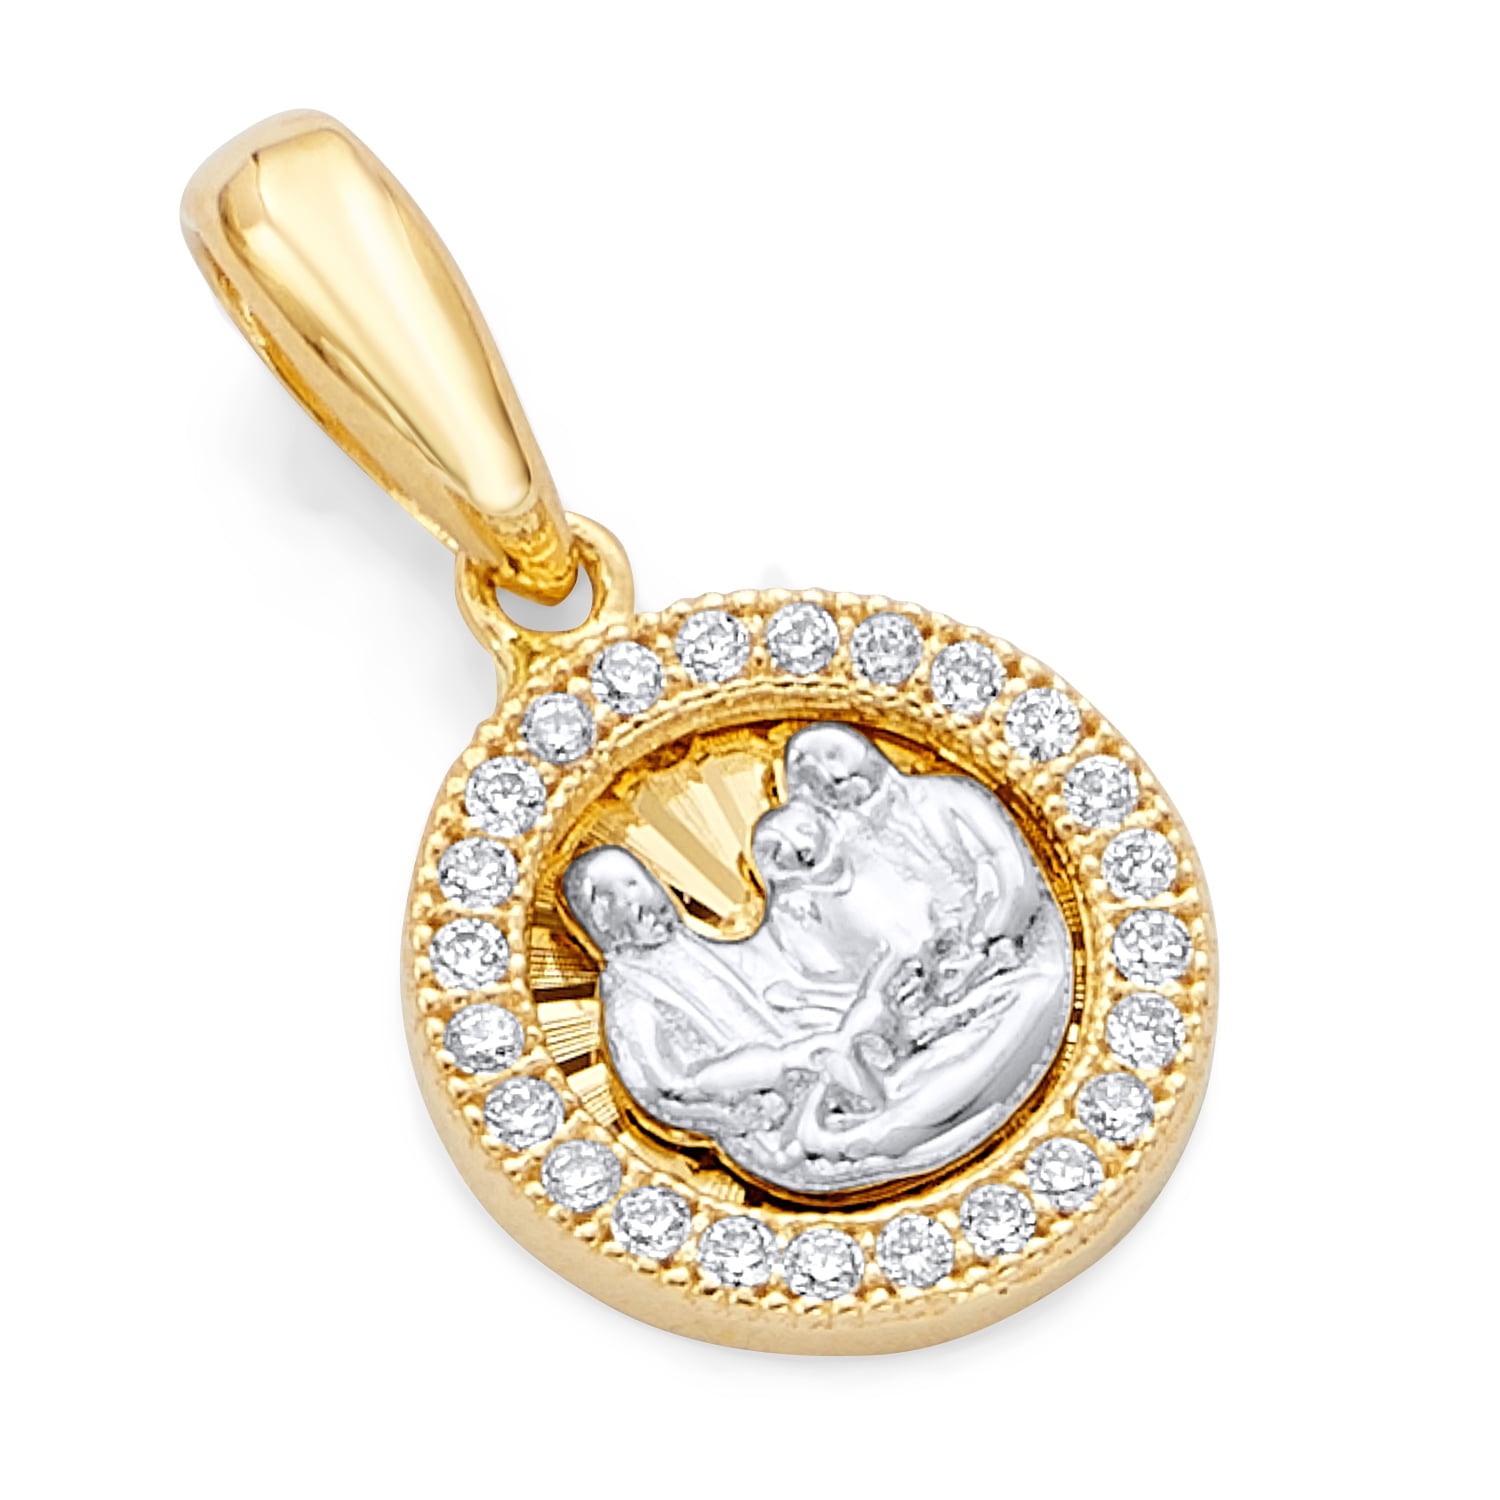 Wellingsale 14k Two 2 Tone White and Yellow Gold Baptism Pendant Size : 21 x 15 mm